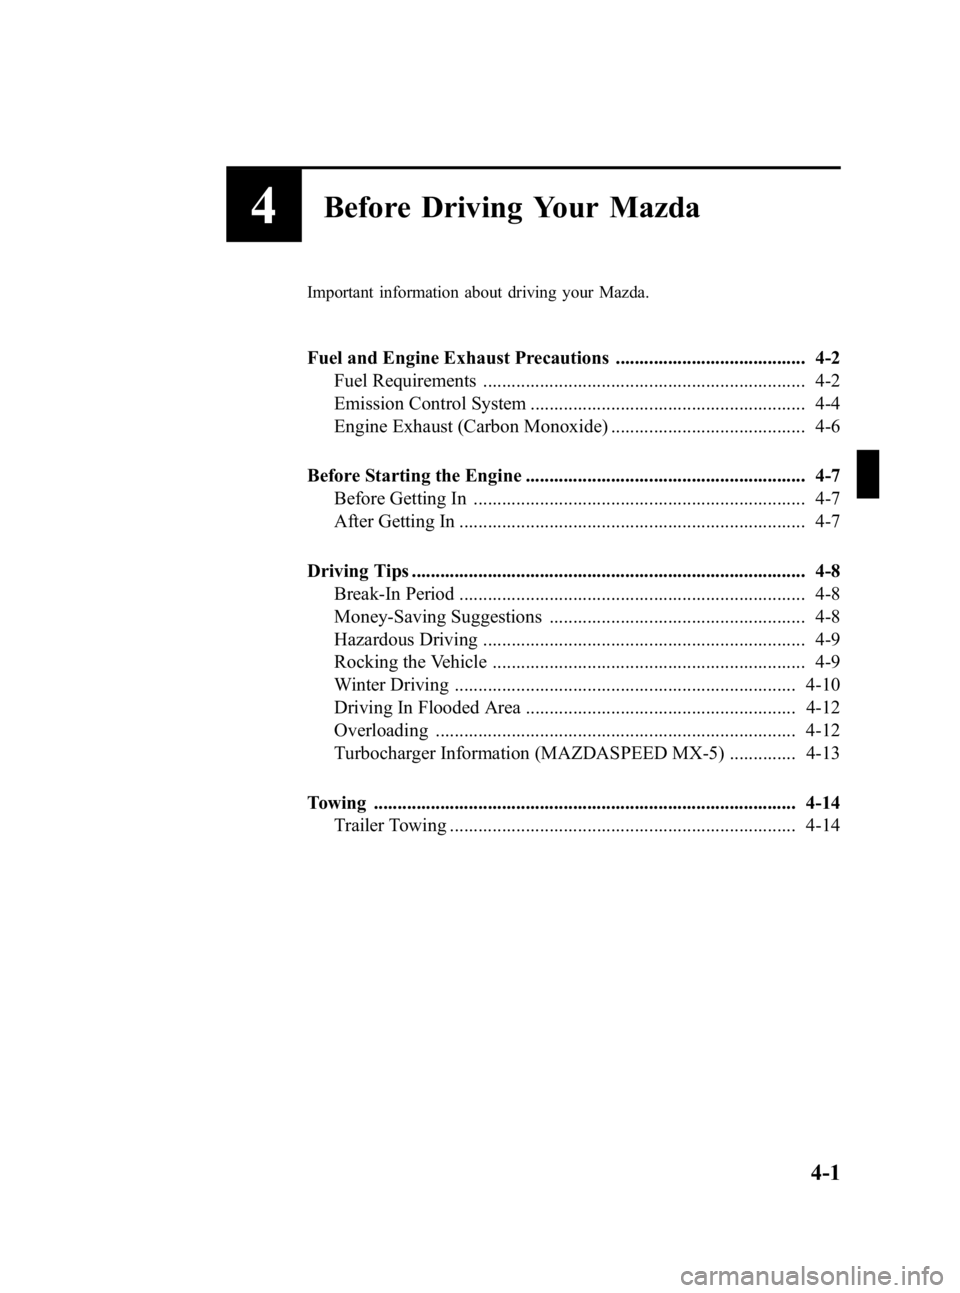 MAZDA MODEL SPEED MX-5 MIATA 2005 Manual PDF Black plate (79,1)
4Before Driving Your Mazda
Important information about driving your Mazda.
Fuel and Engine Exhaust Precautions ........................................ 4-2Fuel Requirements ........